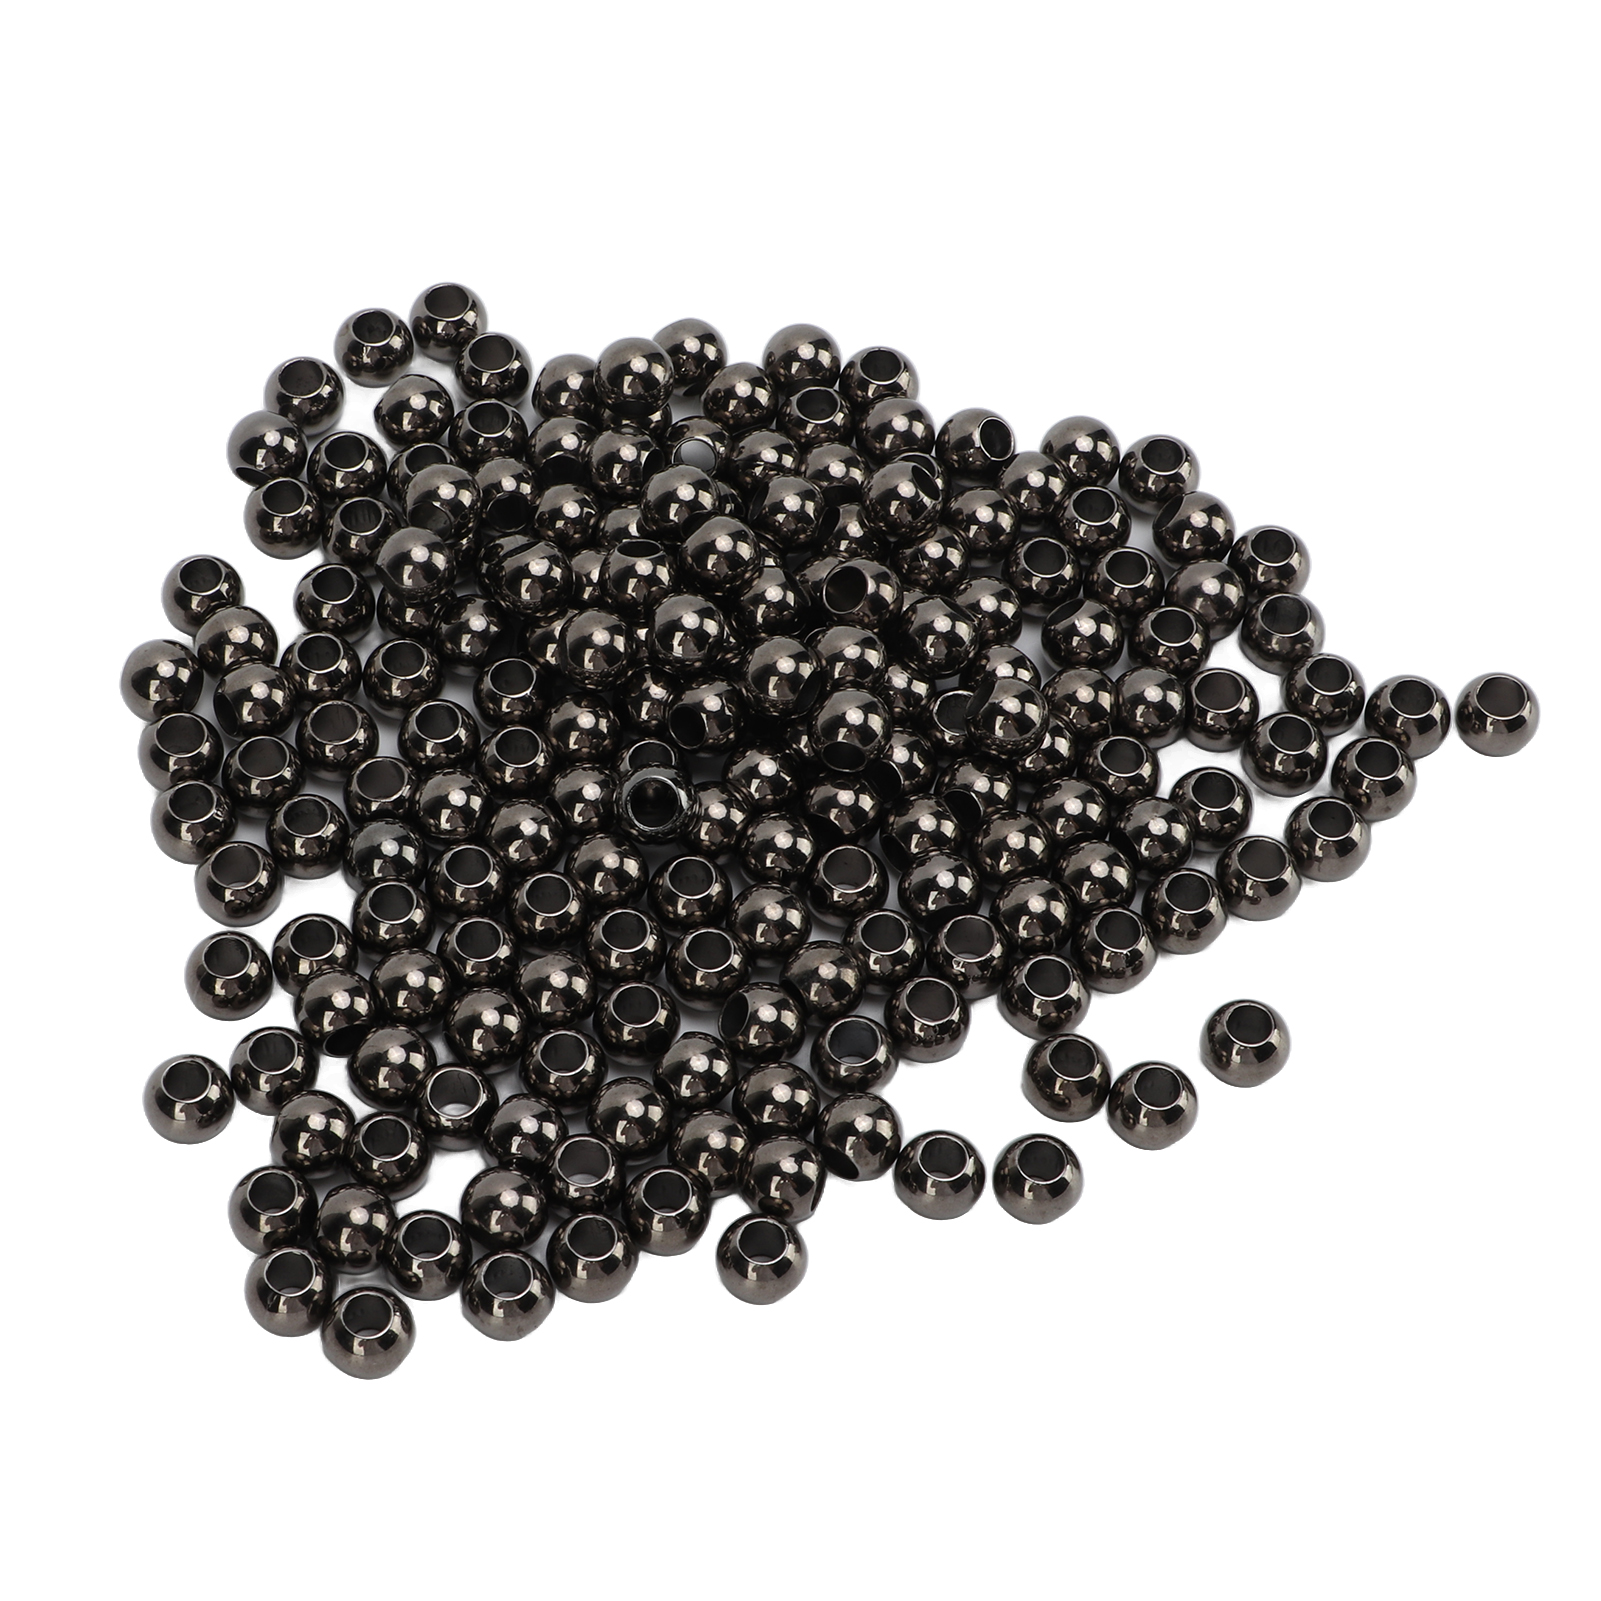 Round Spacer Beads 200 Pcs Spacer Beads Large Hole Round 5mm/0.2in Aperture  10mm/0.4in Jewelry Resin Spacers For Bracelets Necklaces 